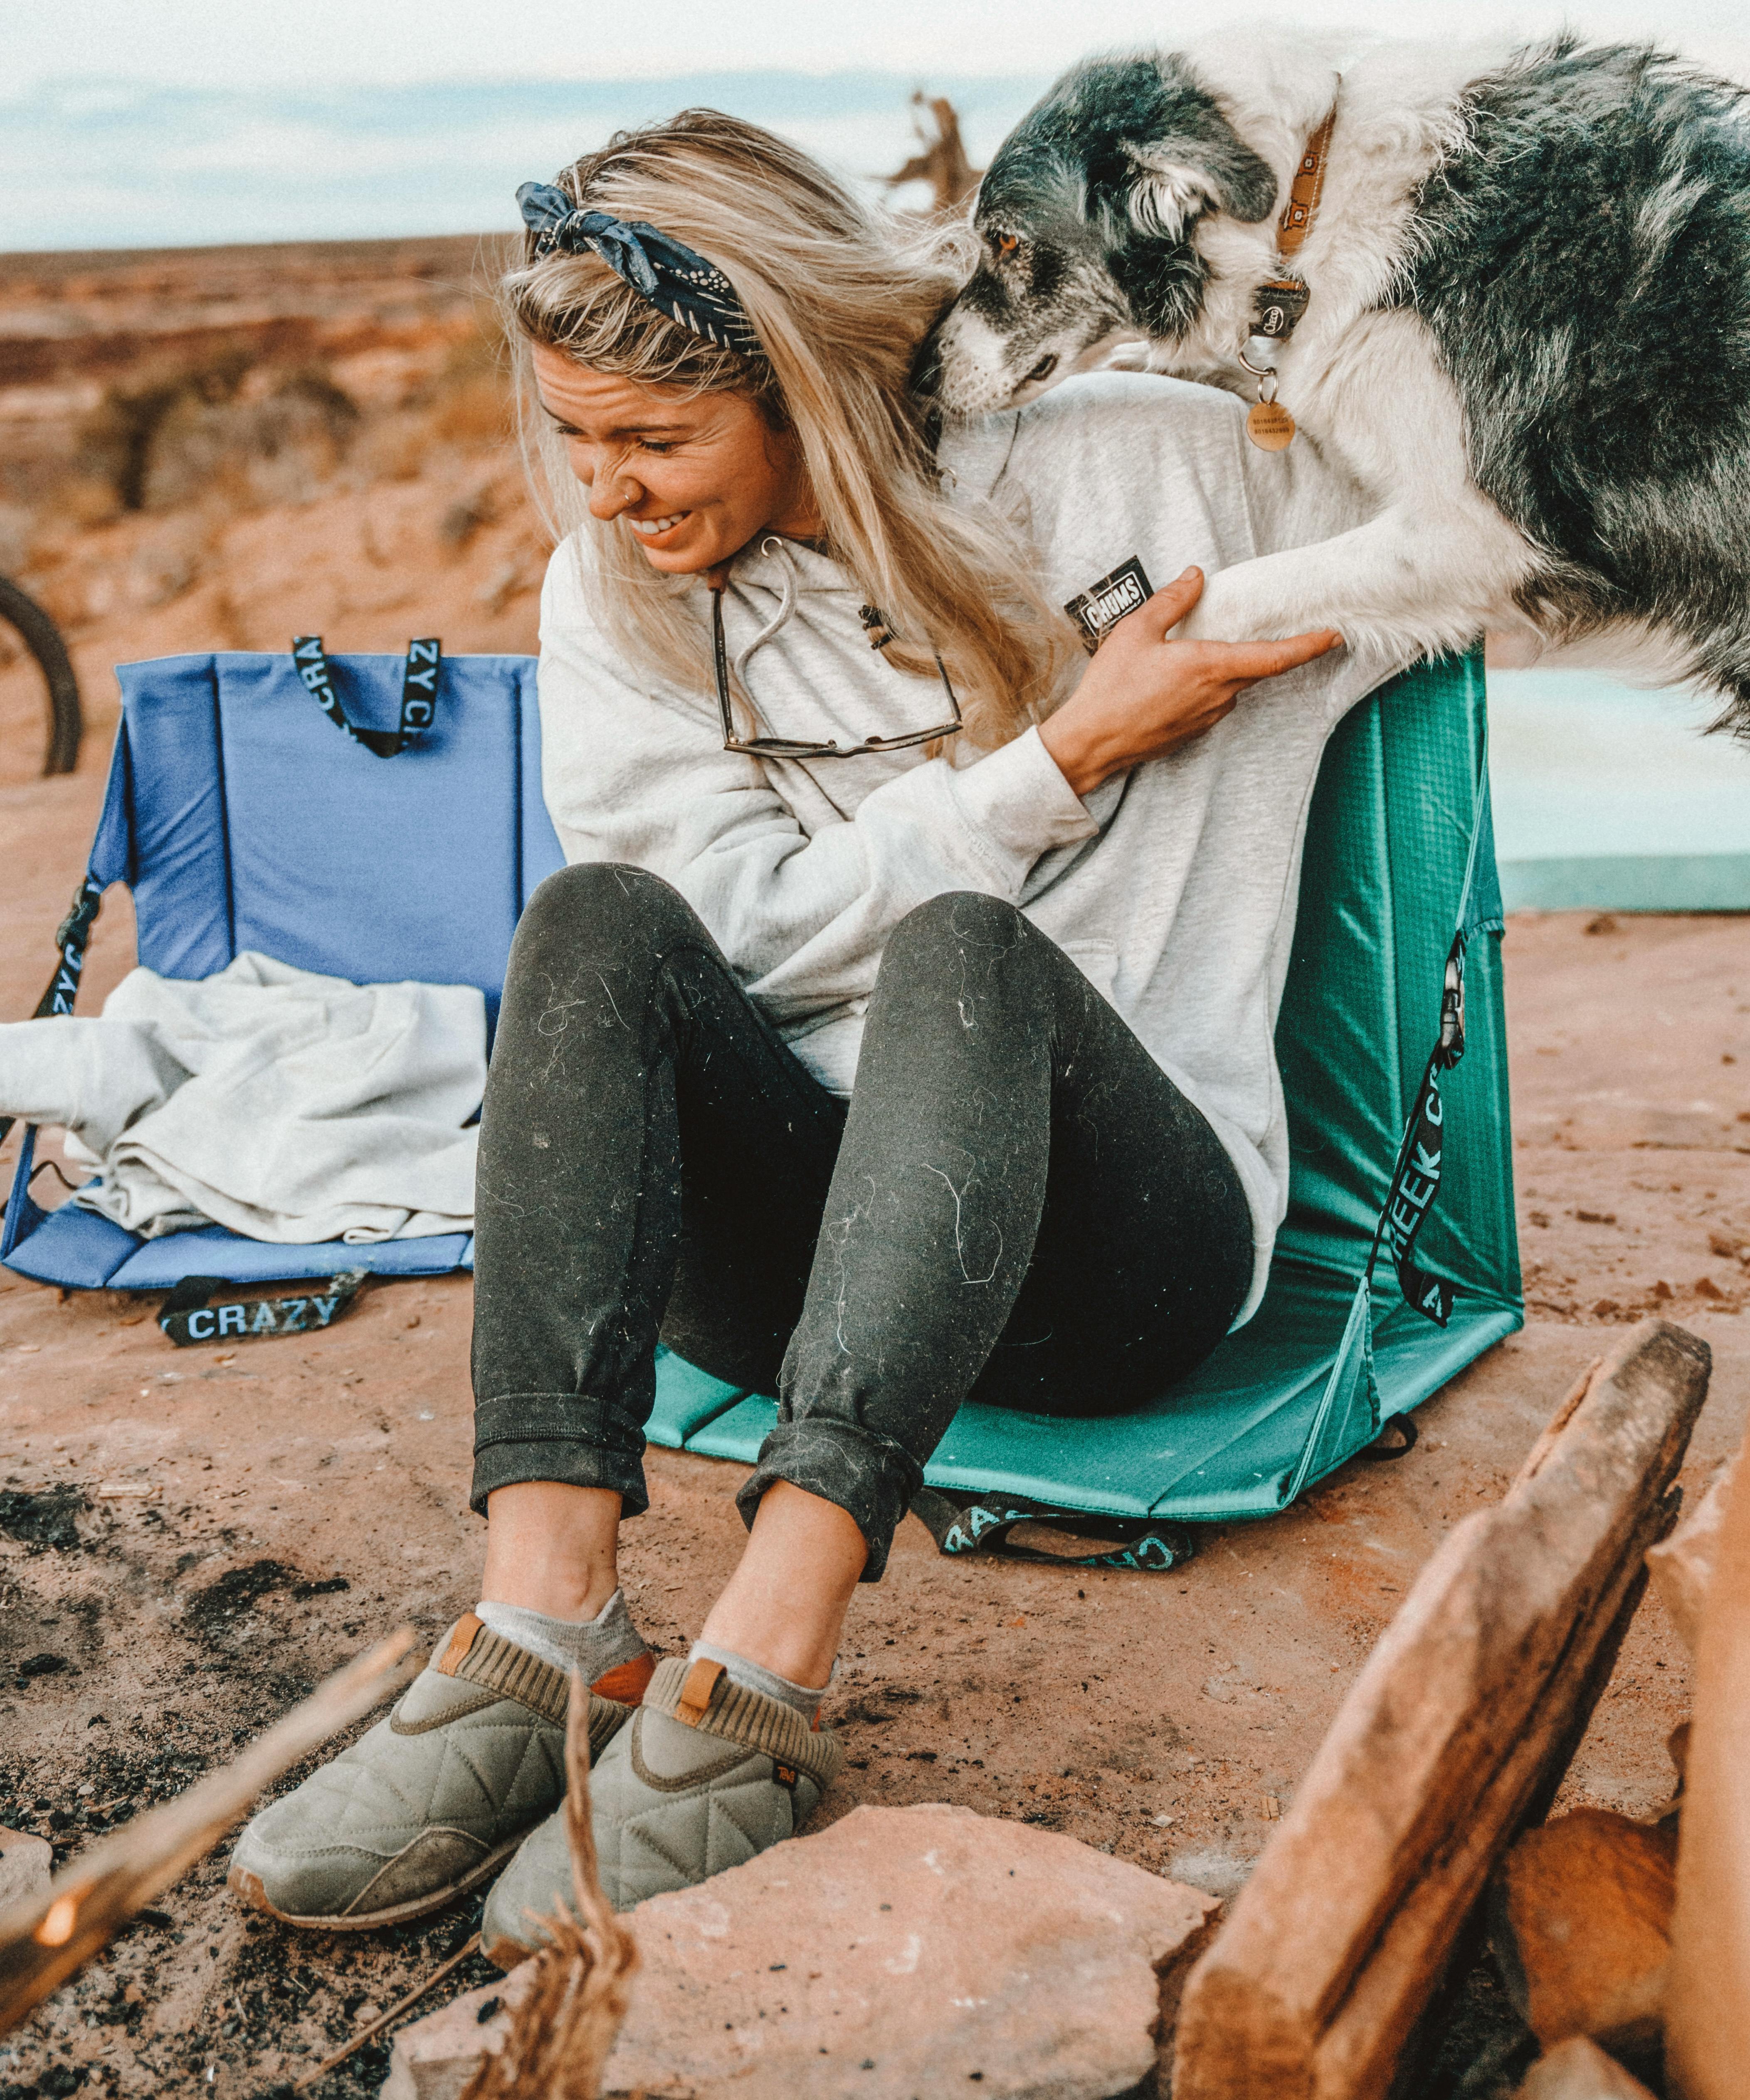 A dog jumps on a woman sitting in a chair around a campfire.